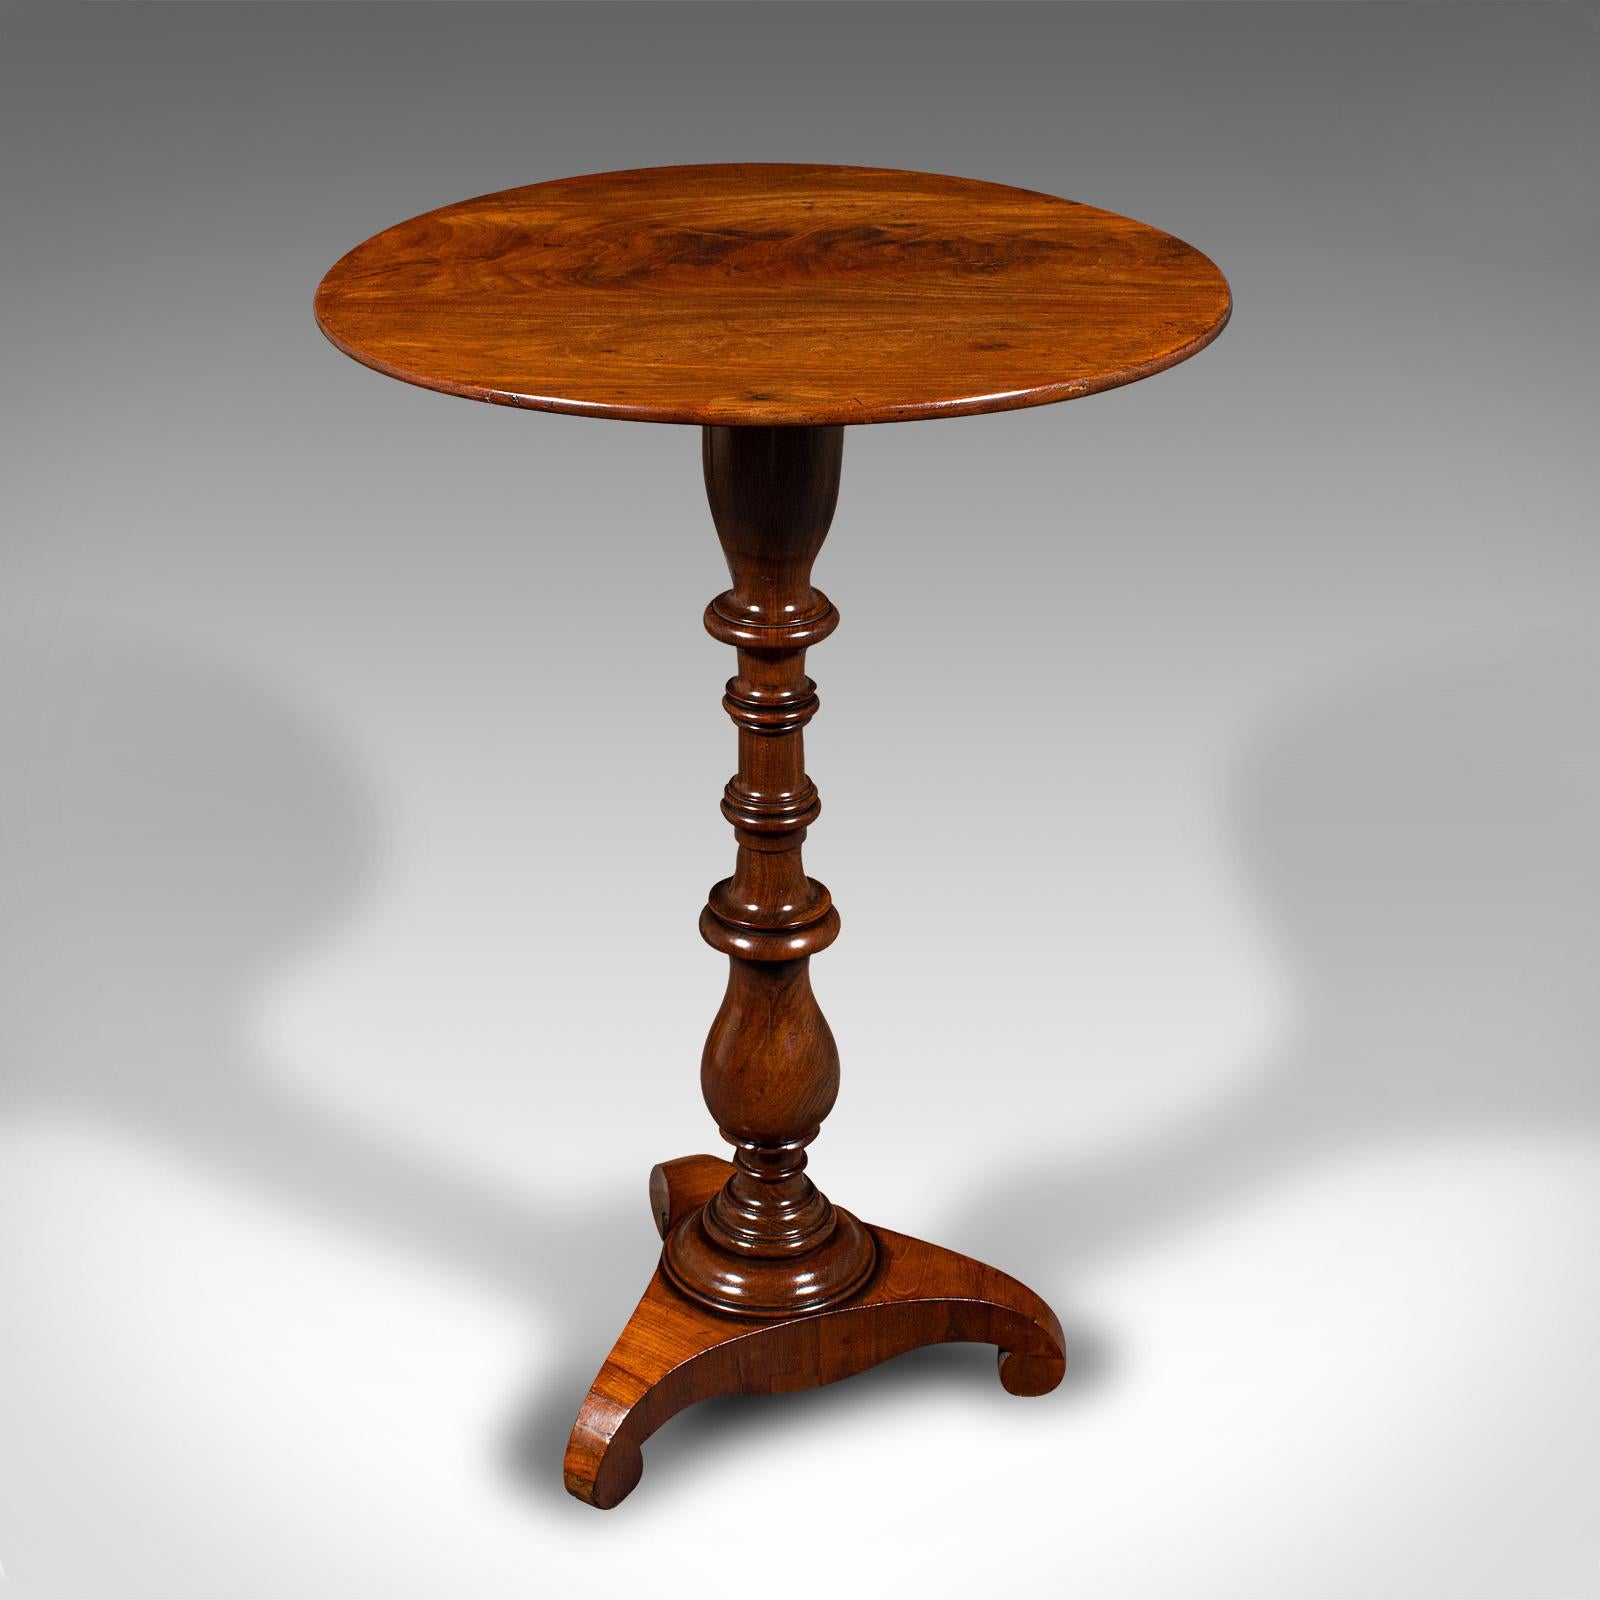 19th Century Small Antique Lamp Table, English, Flame, Wine, Occasional, Regency, Circa 1820